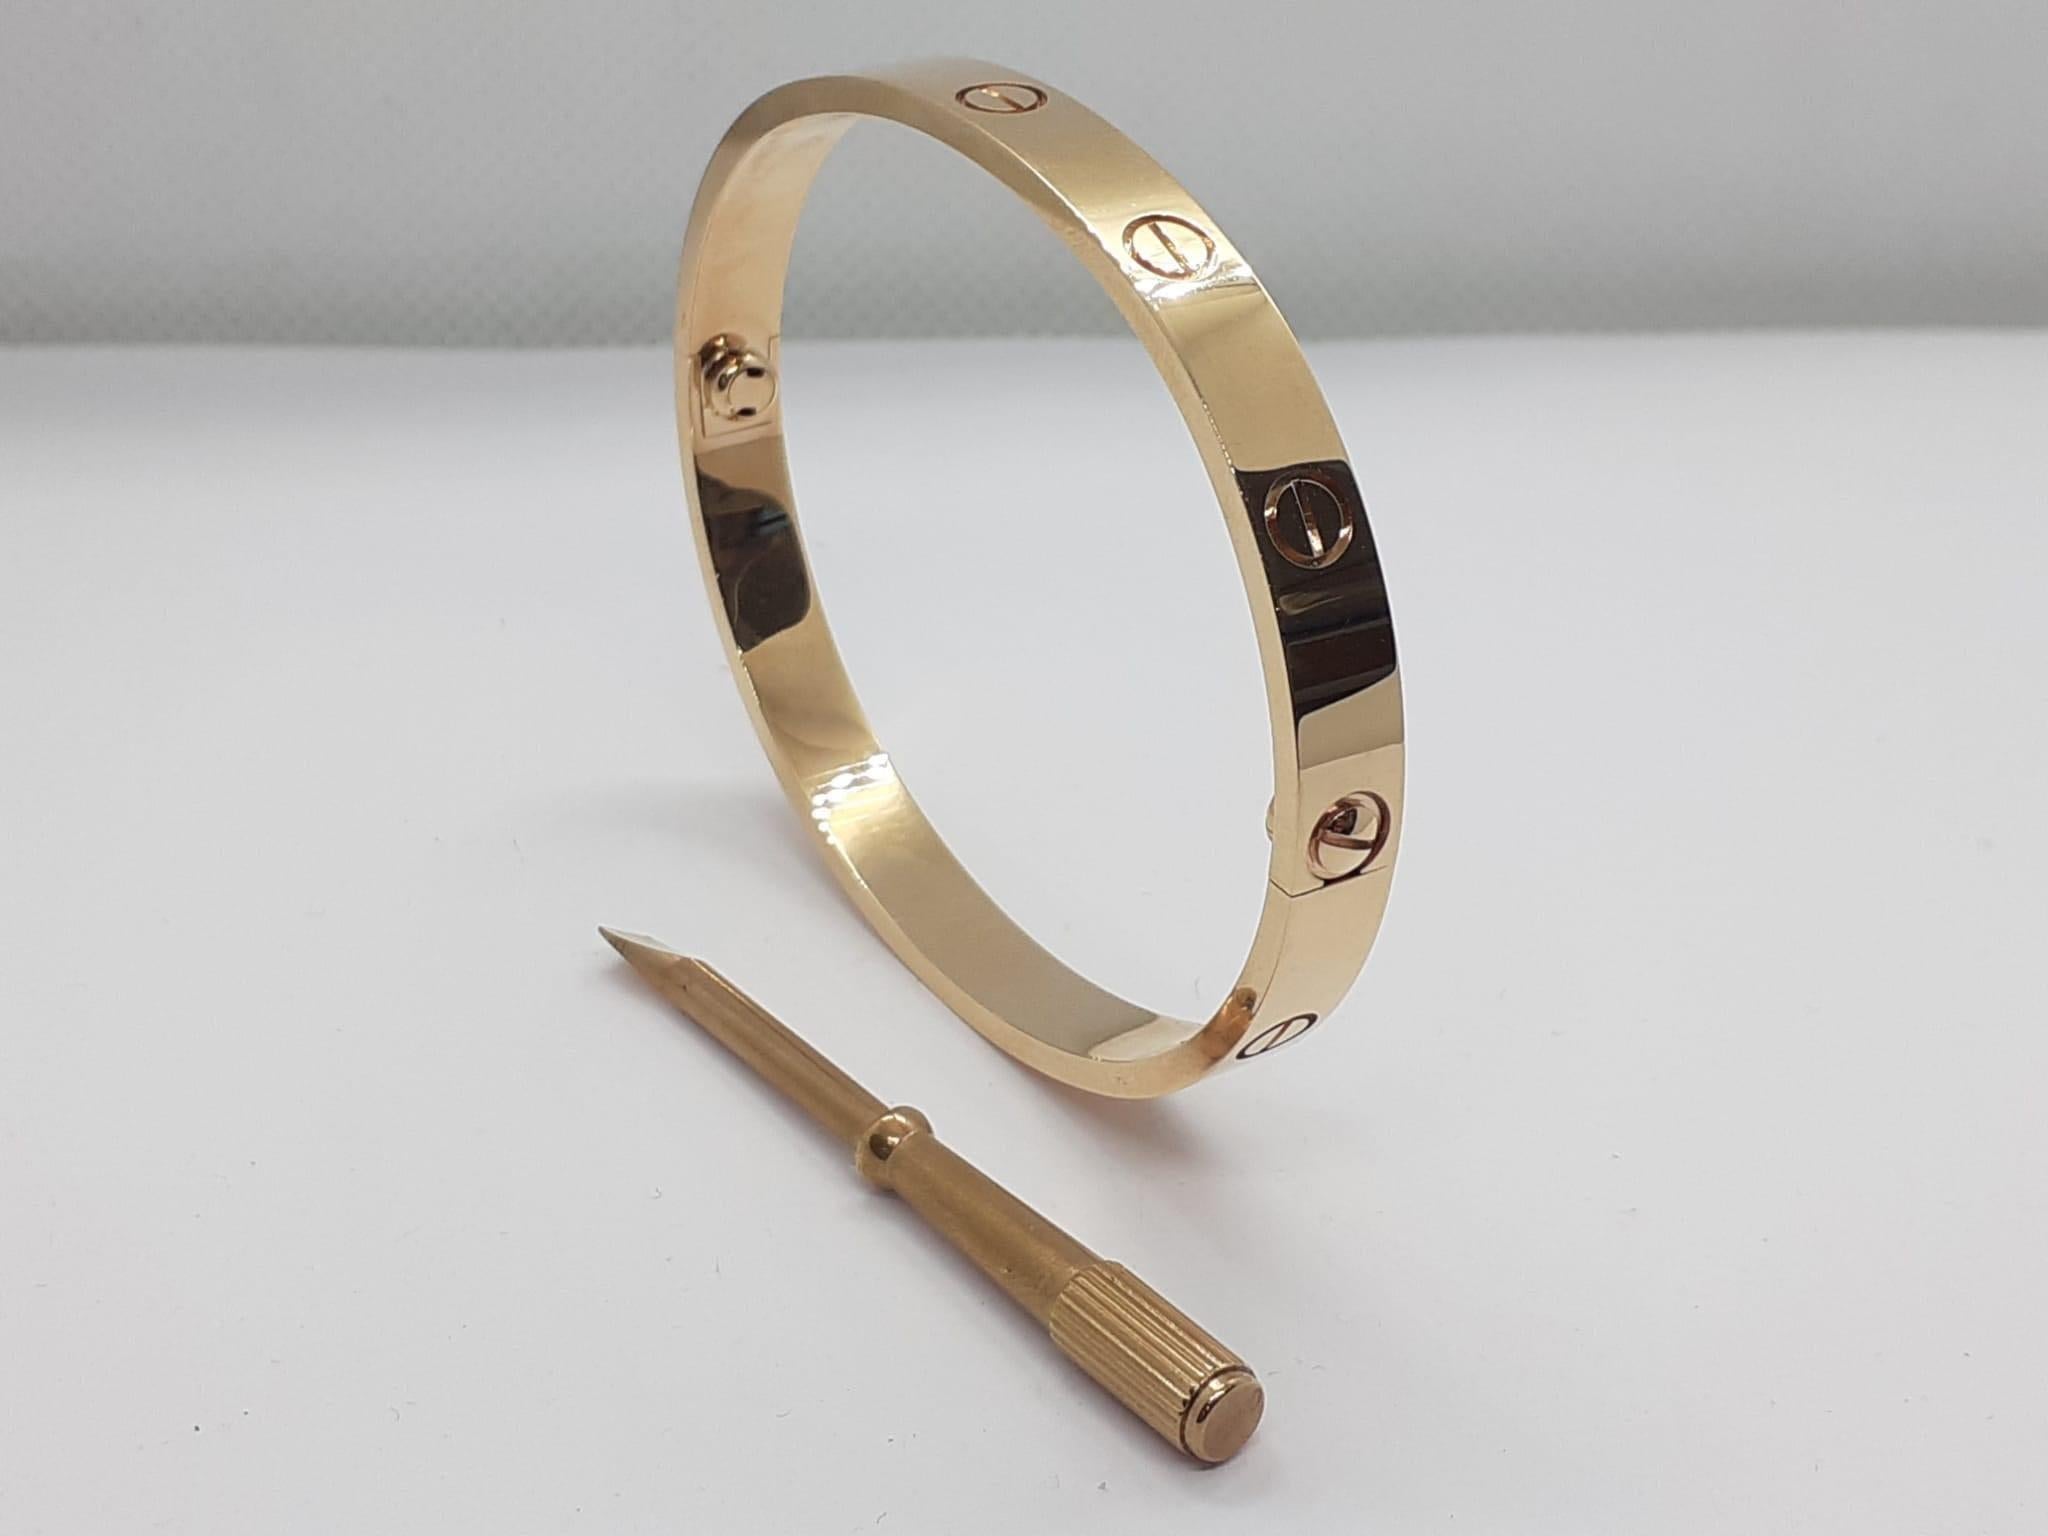 CARTIER LOVE BRACELET
In yellow Gold in different measures this one is 17
If the robust locking mechanism and miniature screw heads that characterized Cartier’s Love bracelet when it first appeared conjured crude, medieval hardware, there’s a good